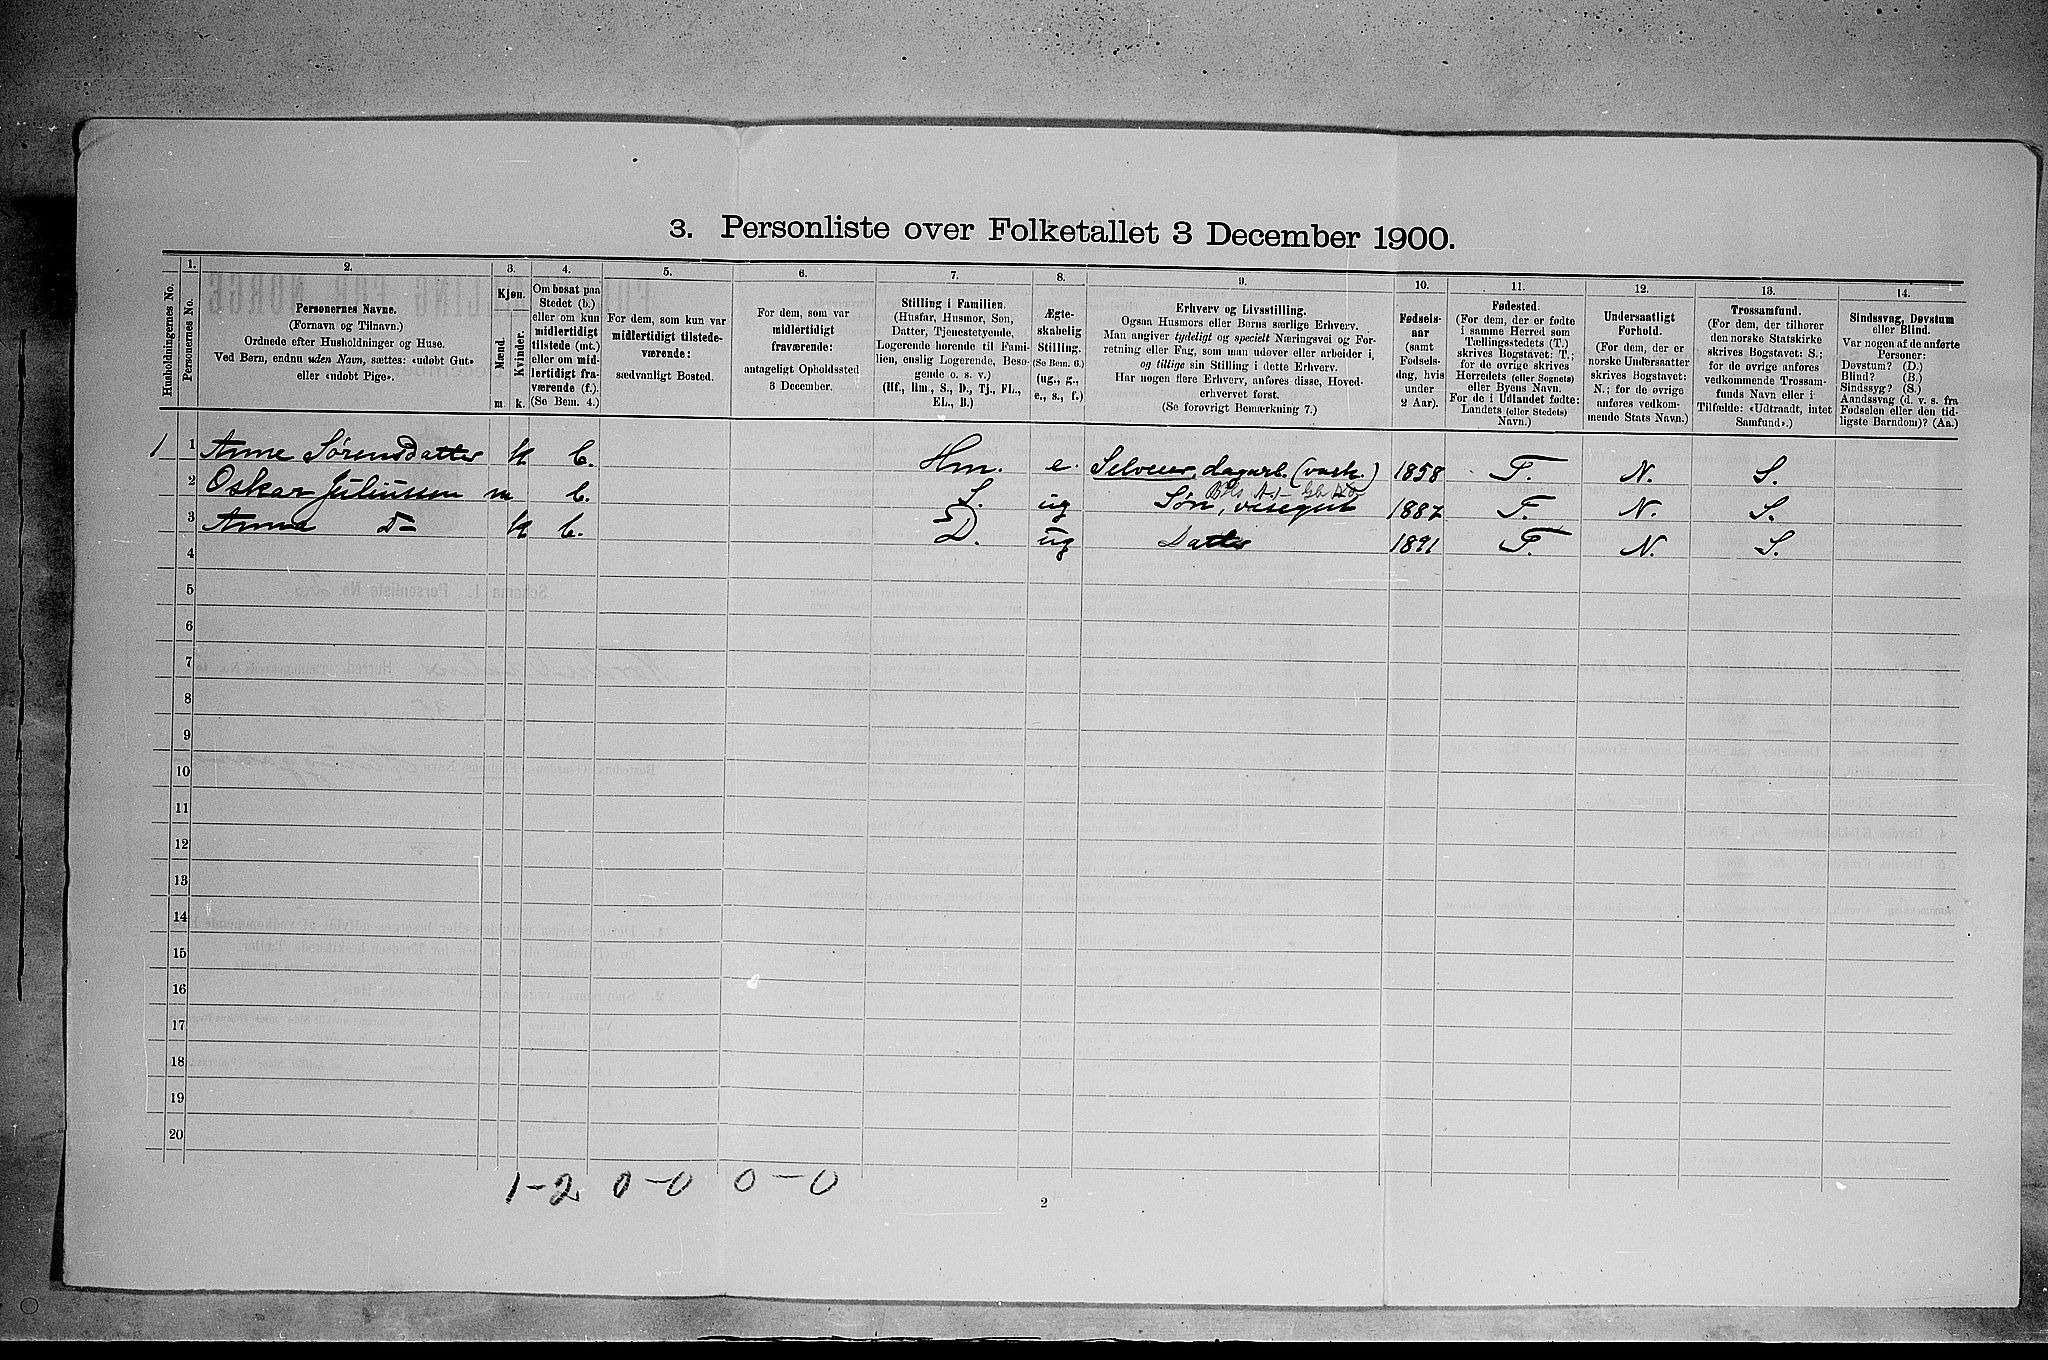 SAH, 1900 census for Nord-Odal, 1900, p. 706